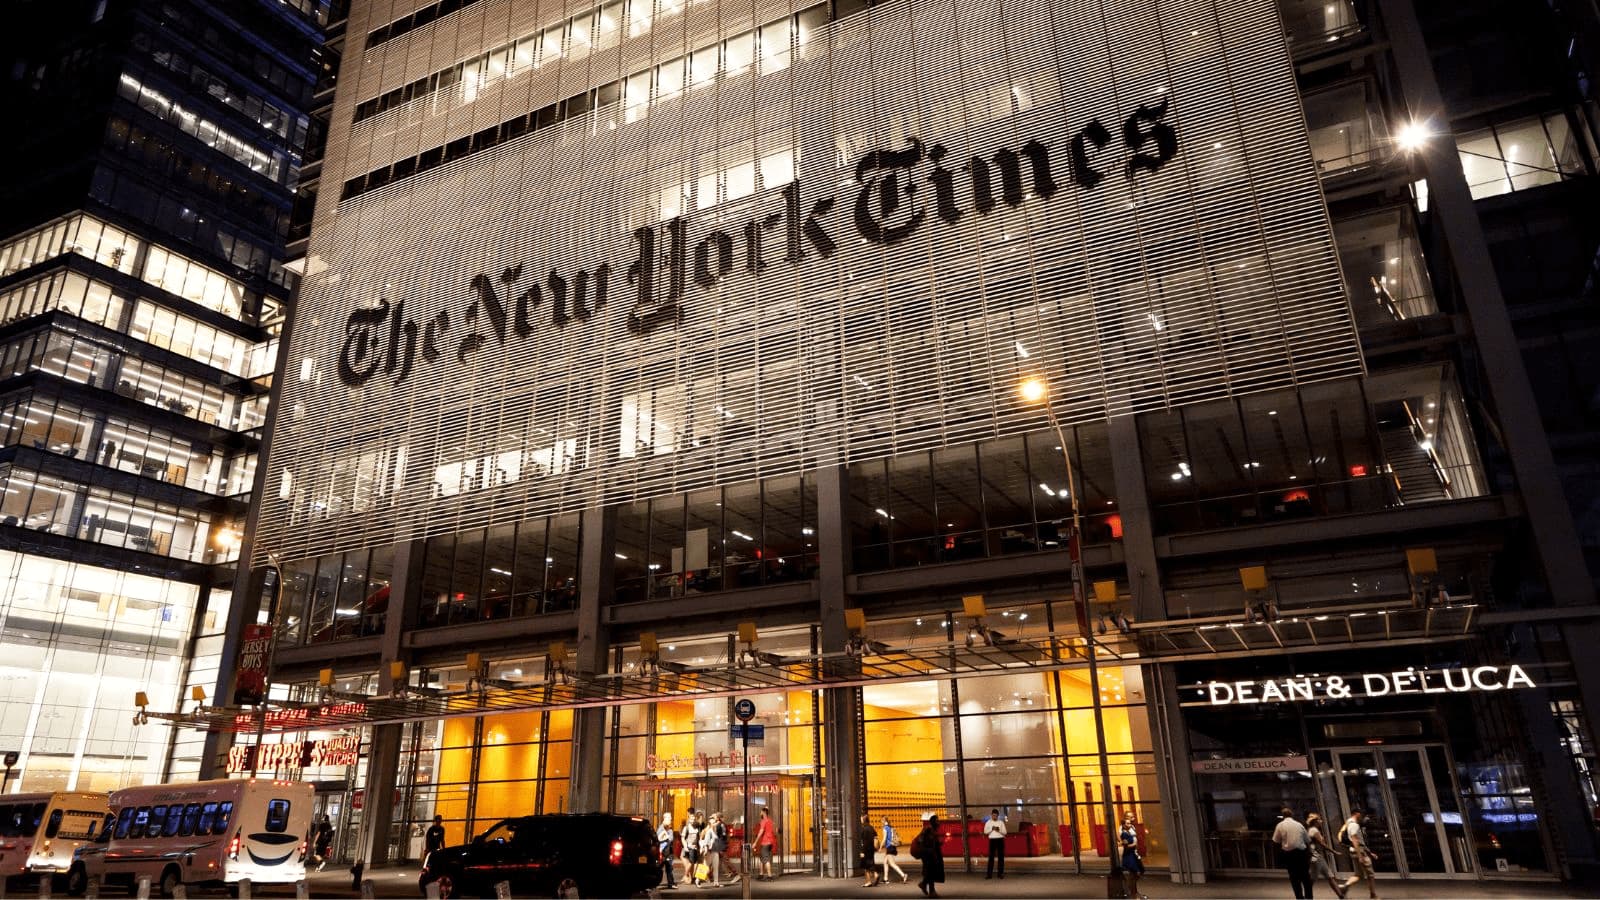 A photo of the famous newspaper The New York Times.